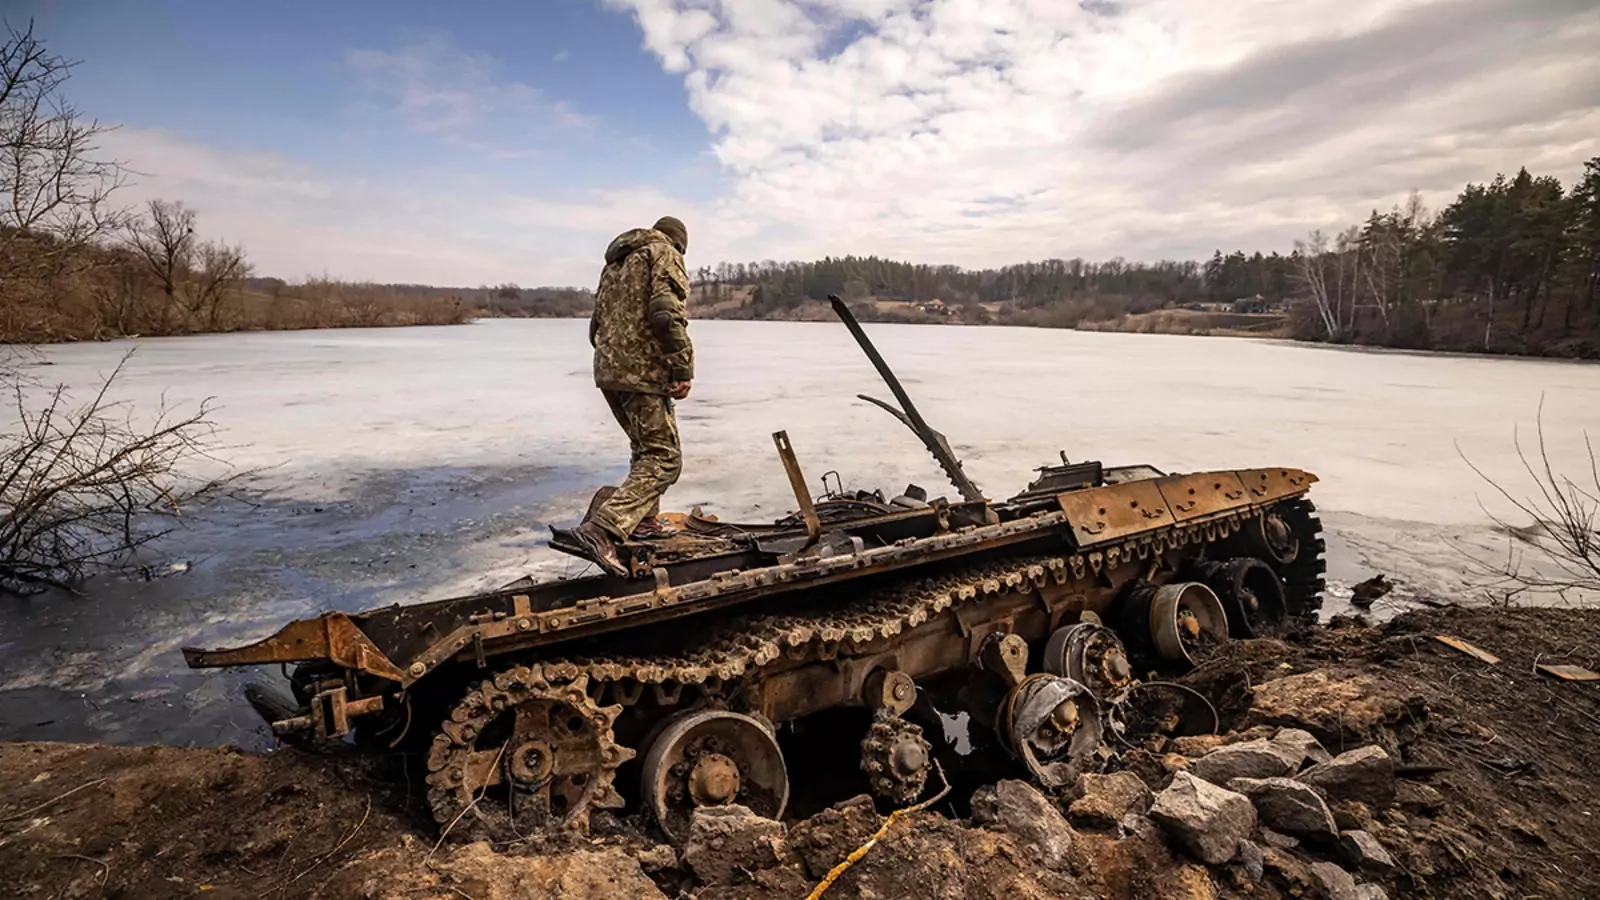 A Ukrainian serviceman stands near a destroyed Russian tank in the northeastern city of Trostianets, on March 29, 2022